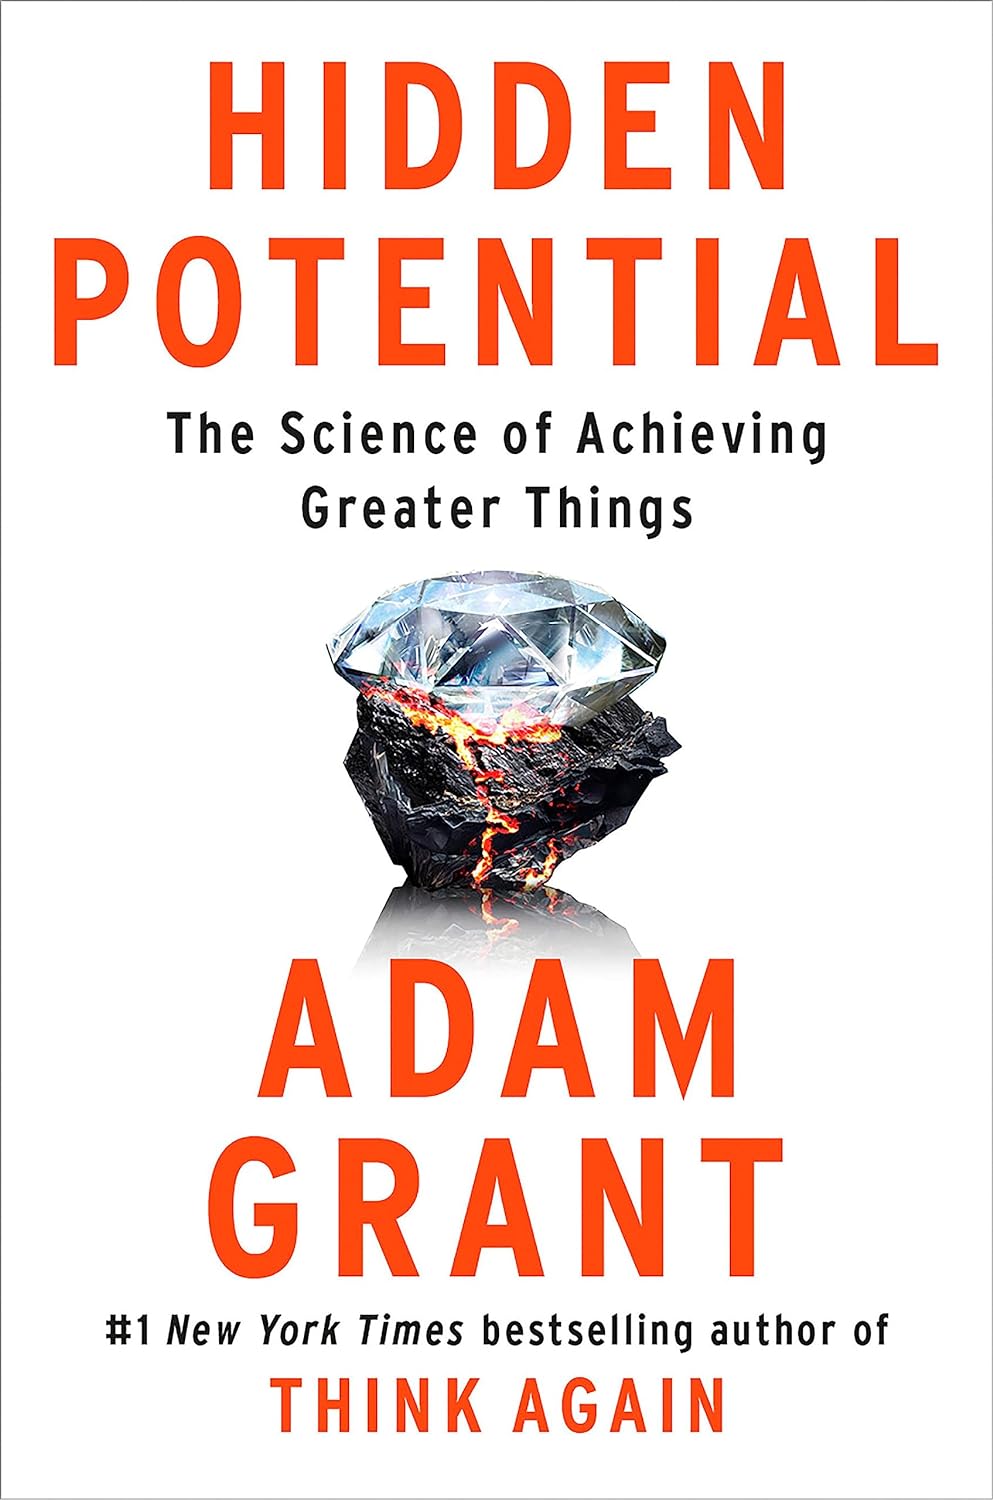 Hidden Potential: The Science of Achieving Greater Things [Book Circle]